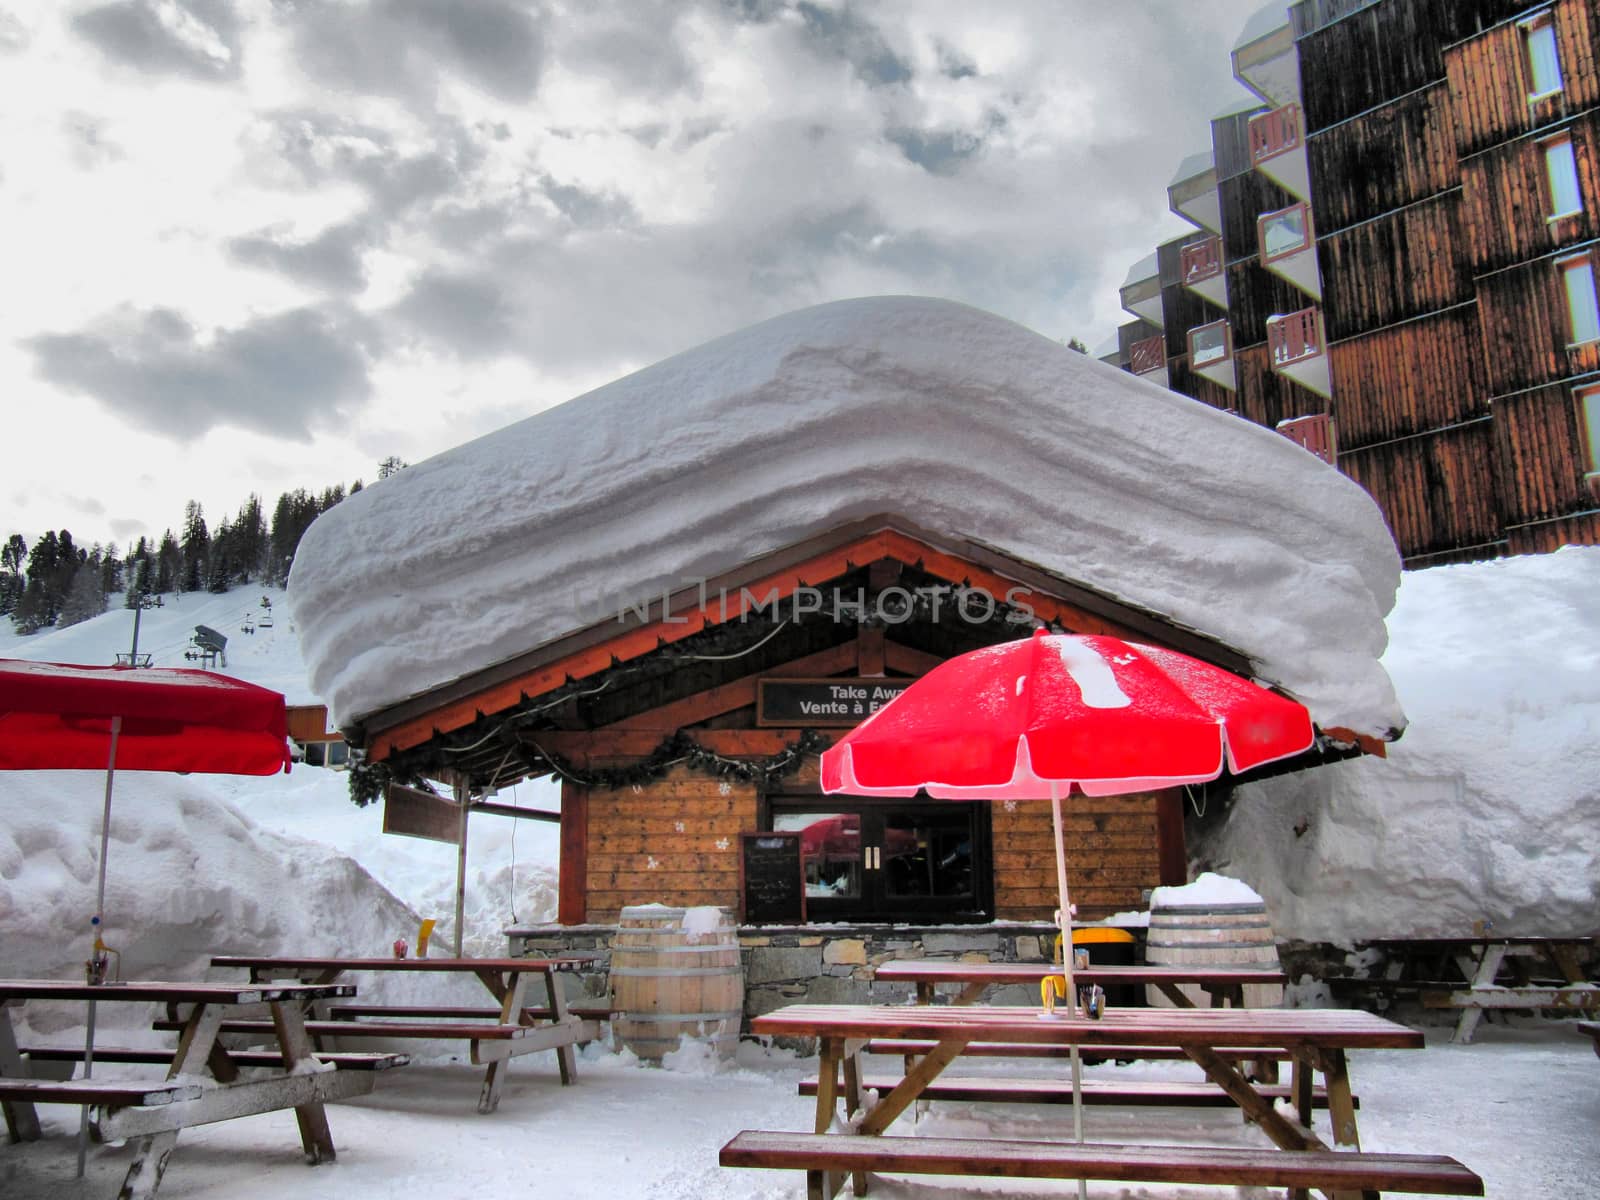 deep snow on the roof of a mountain chalet cabin in la plagne by chrisga